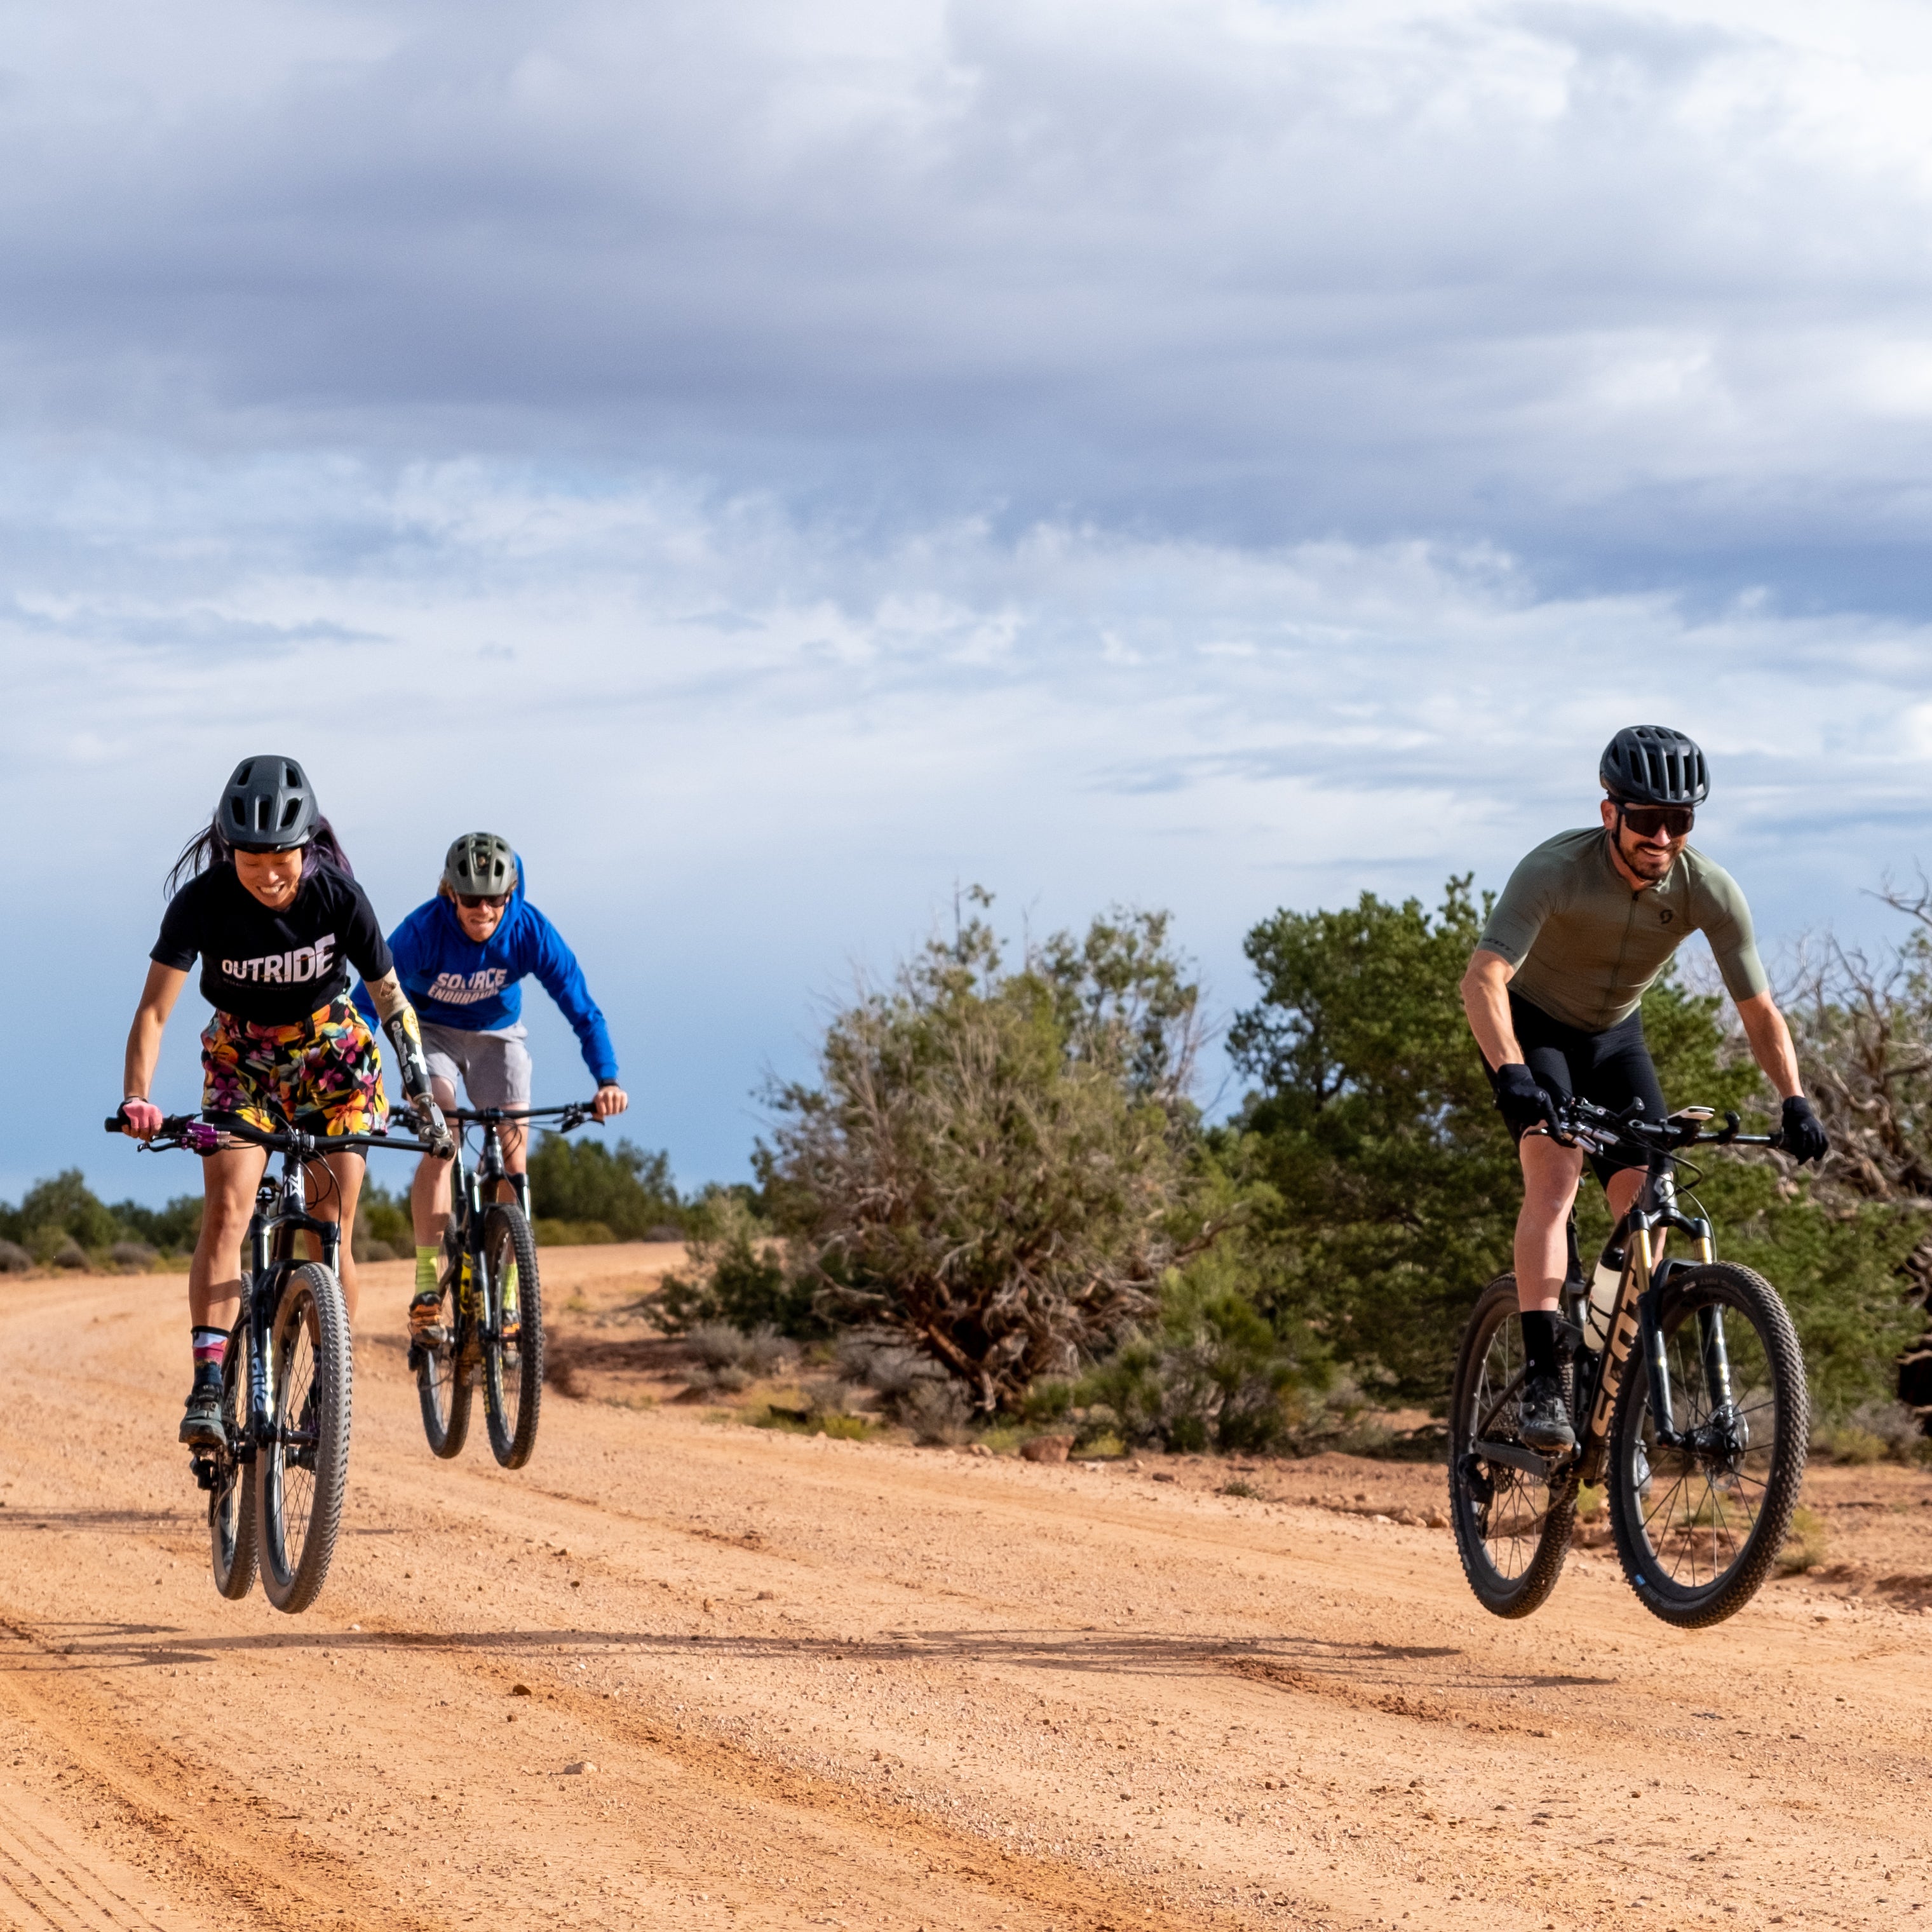 Two adaptive mountain bikers ride side by side leading a third rider into a coordinated lift with the front and rear wheels level and in sync with each other. As a consequence, all three riders are also synchronizing their smiles.  Photo credit: Matt Didisheim https://www.instagram.com/didisheim/